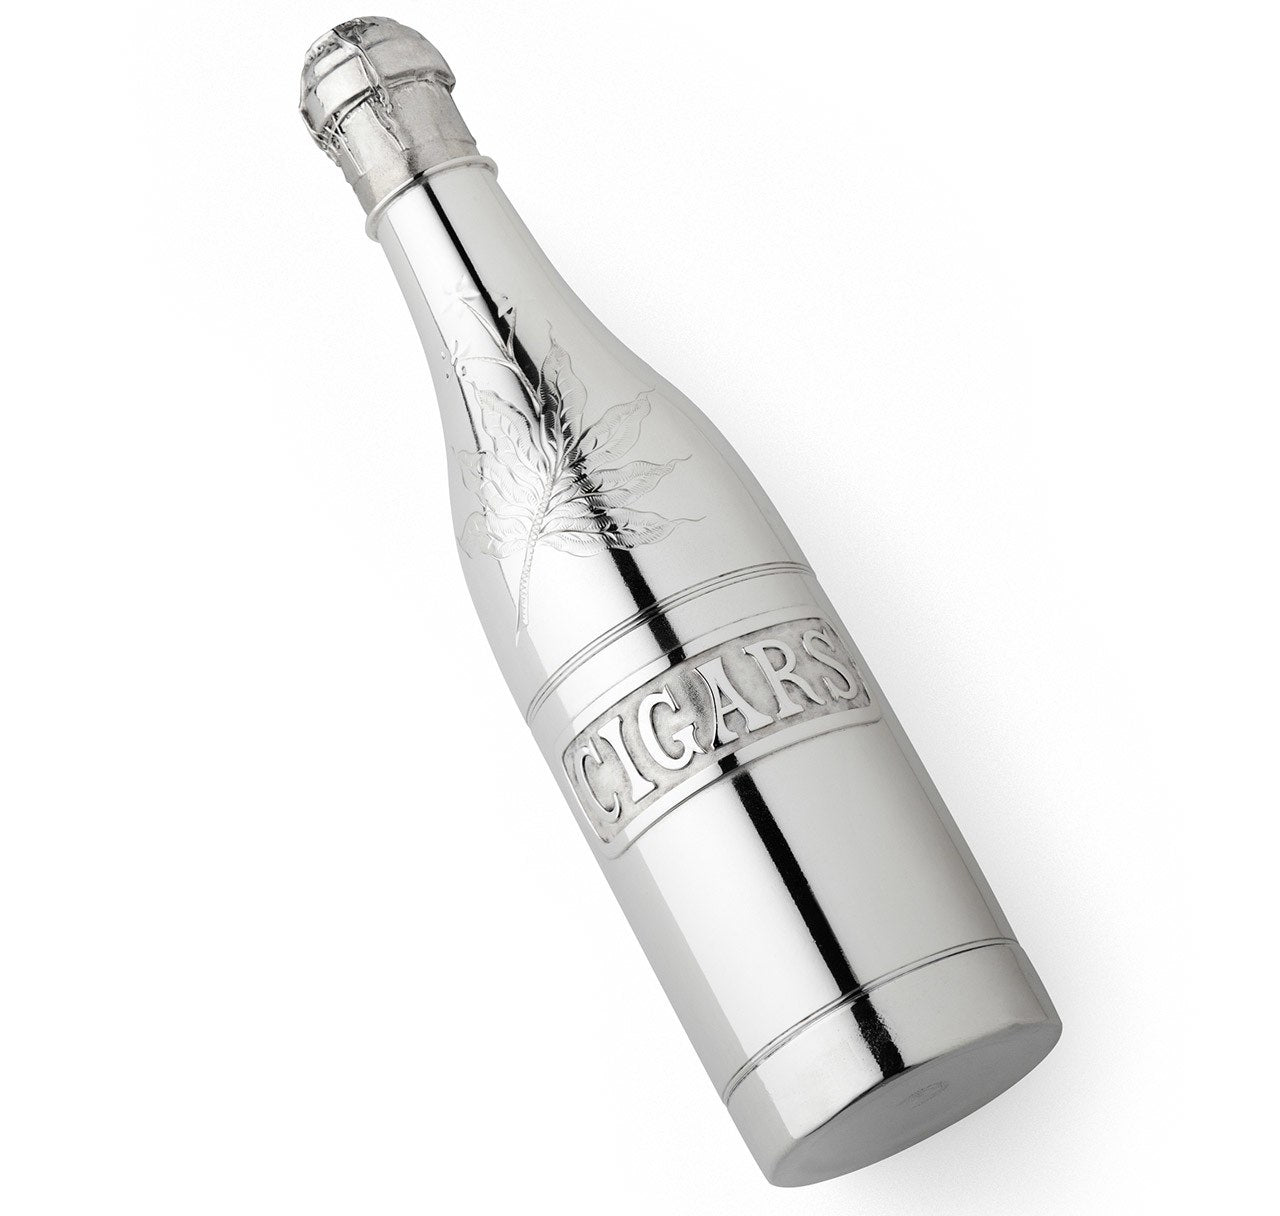 Pairpoint Silver-Plated Champagne Bottle Form Cigar Humidor